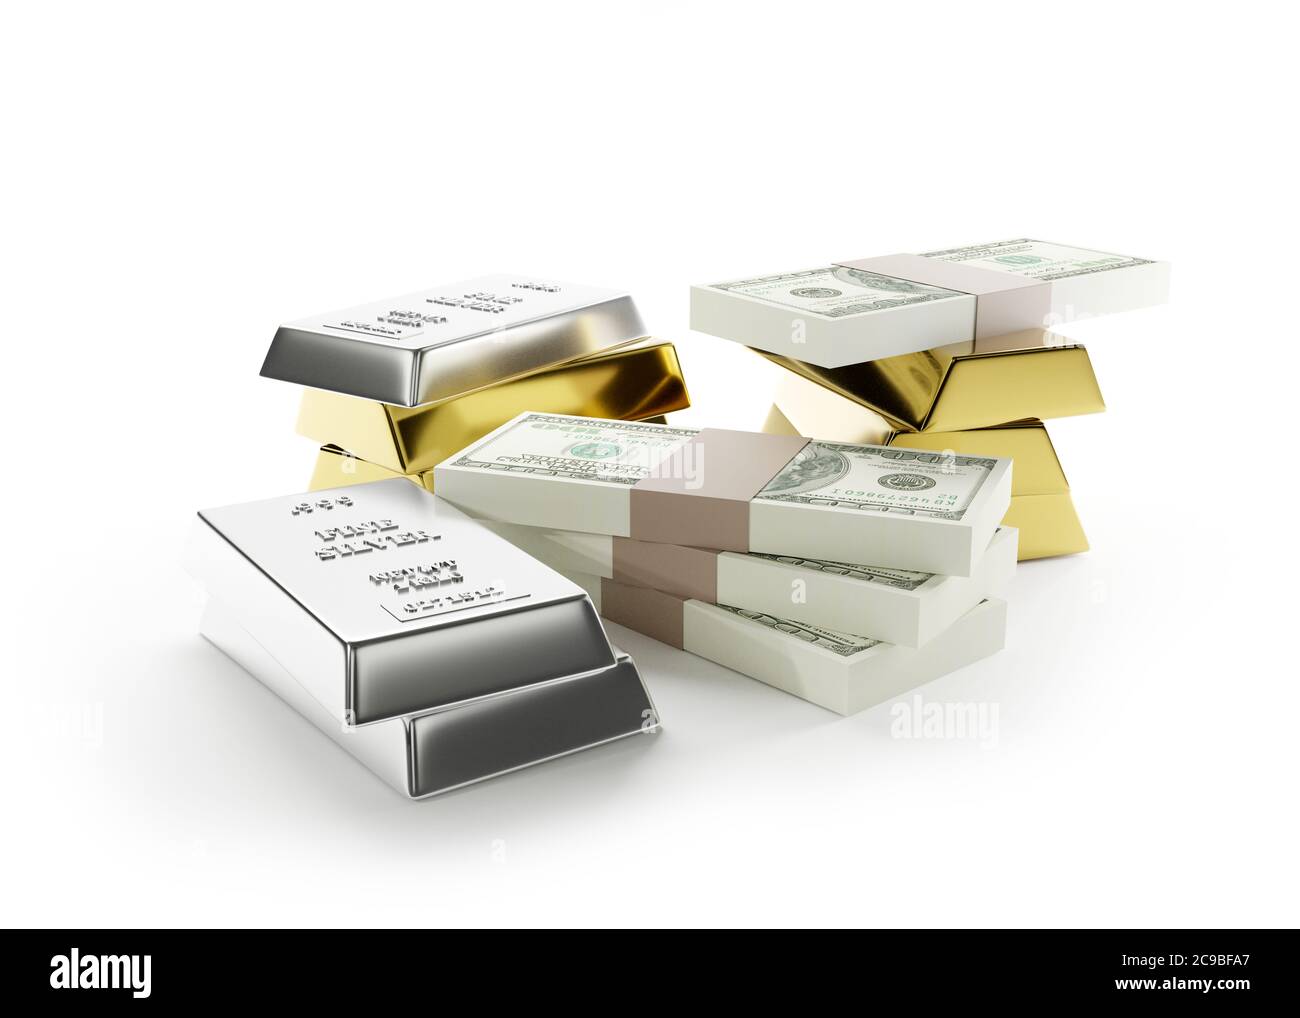 Value of Gold, Silver and currency, main actors of global economy. Analyzing and strategy in financial business. Economy concept in 3D illustration Stock Photo